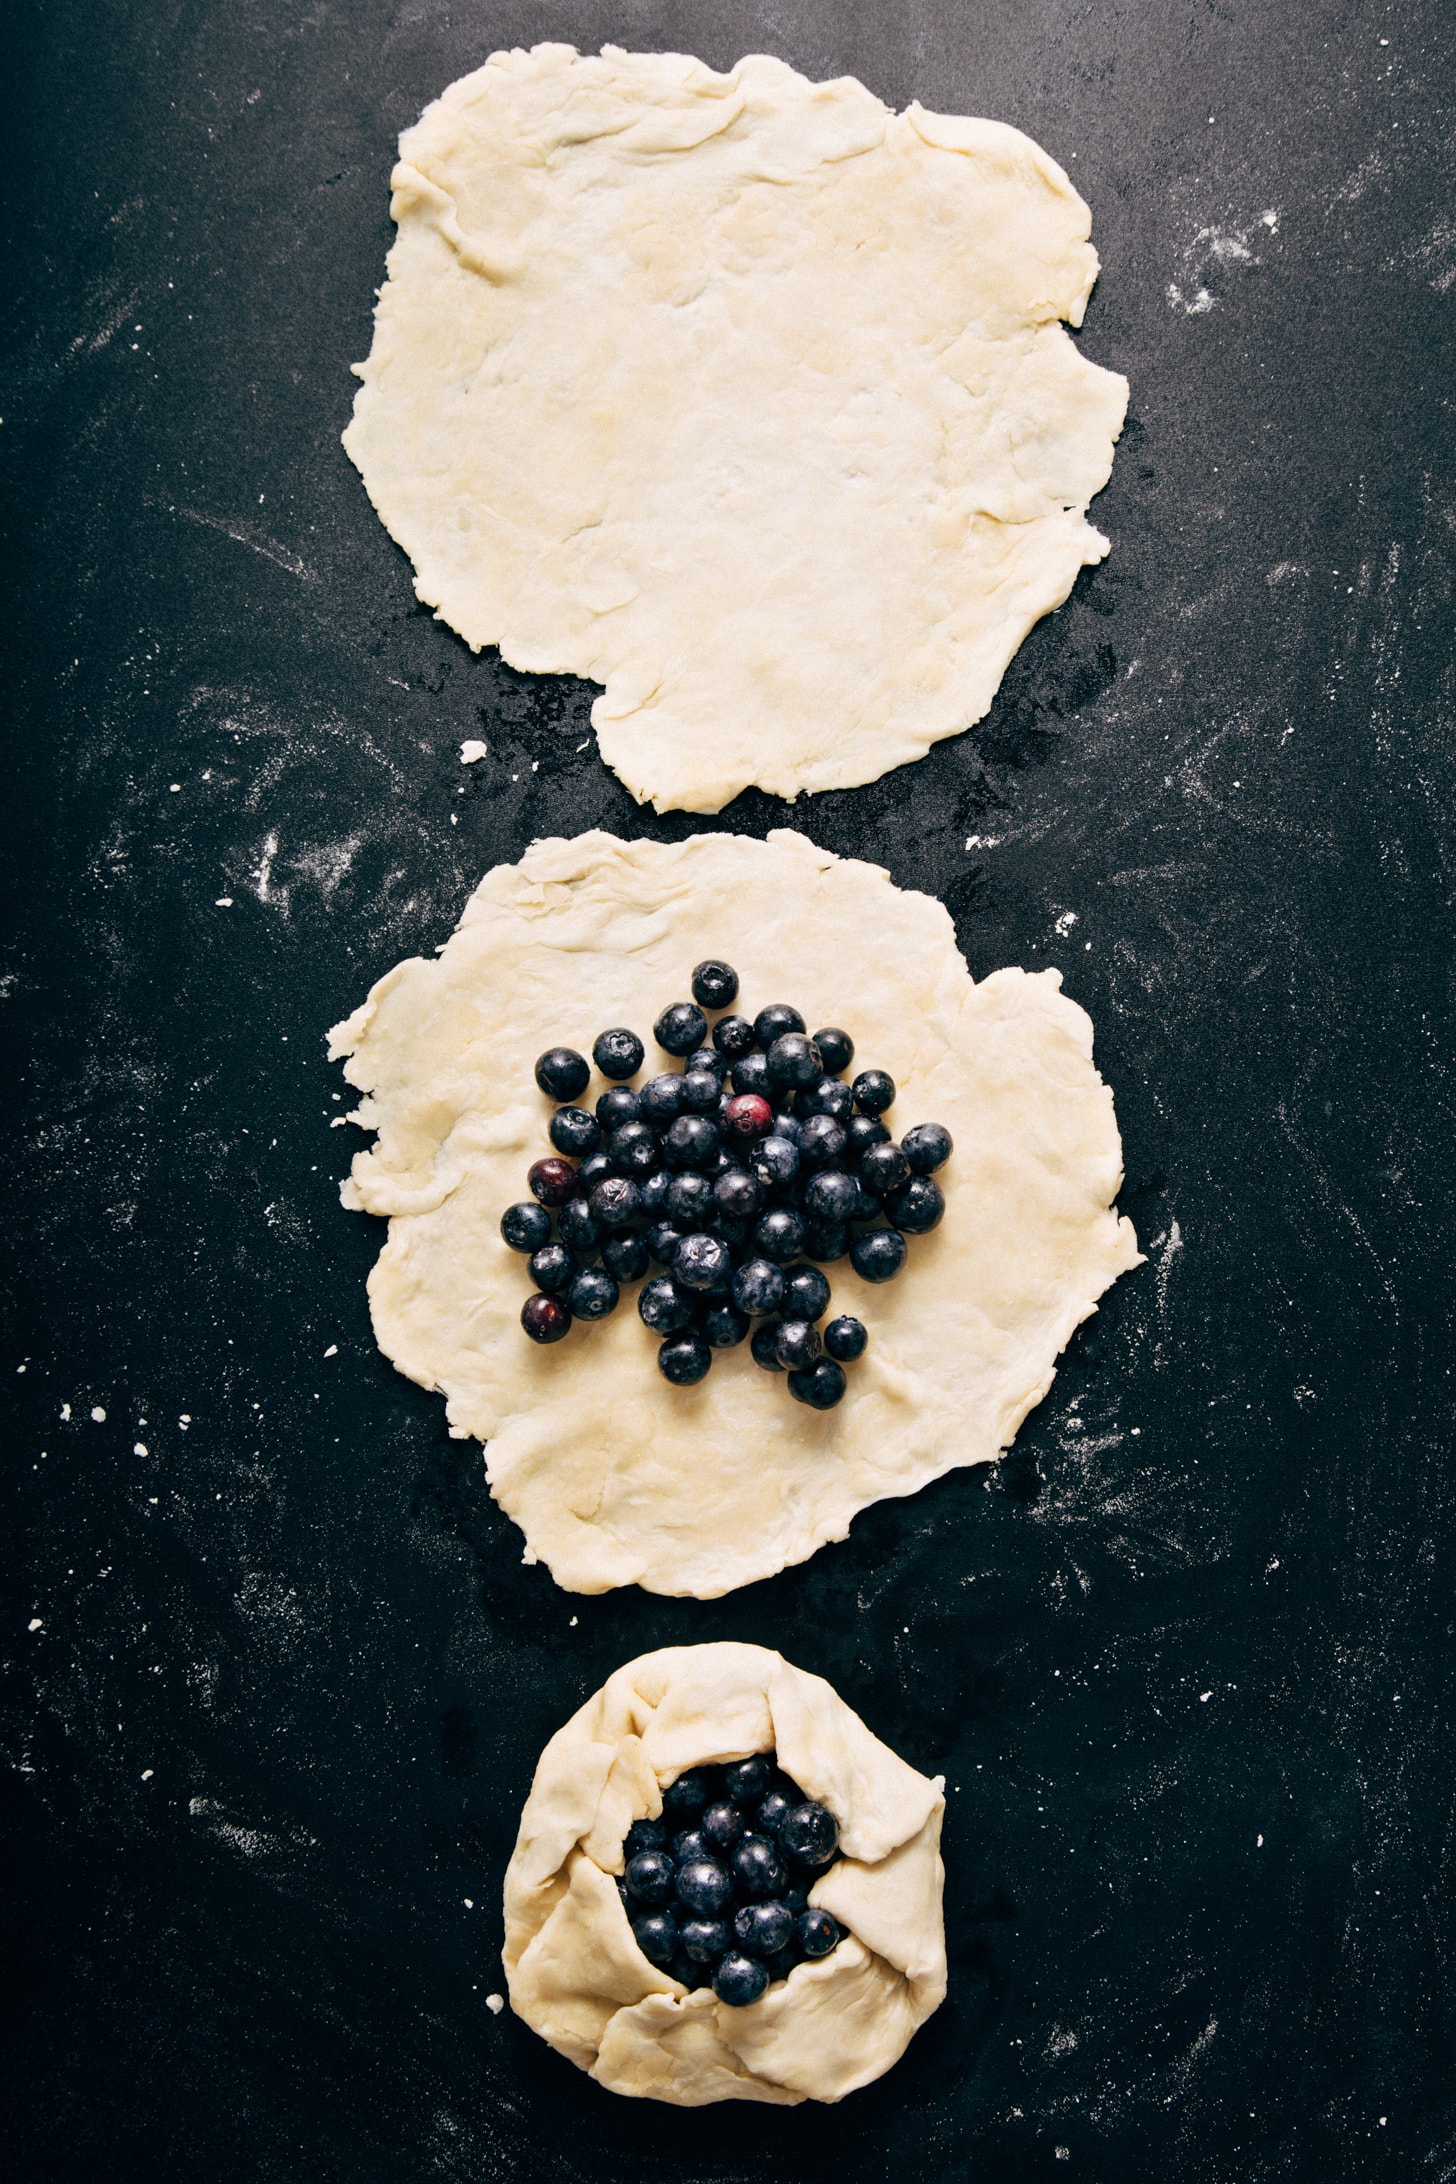 Mini Blueberry Galettes in various stages of the preparation process